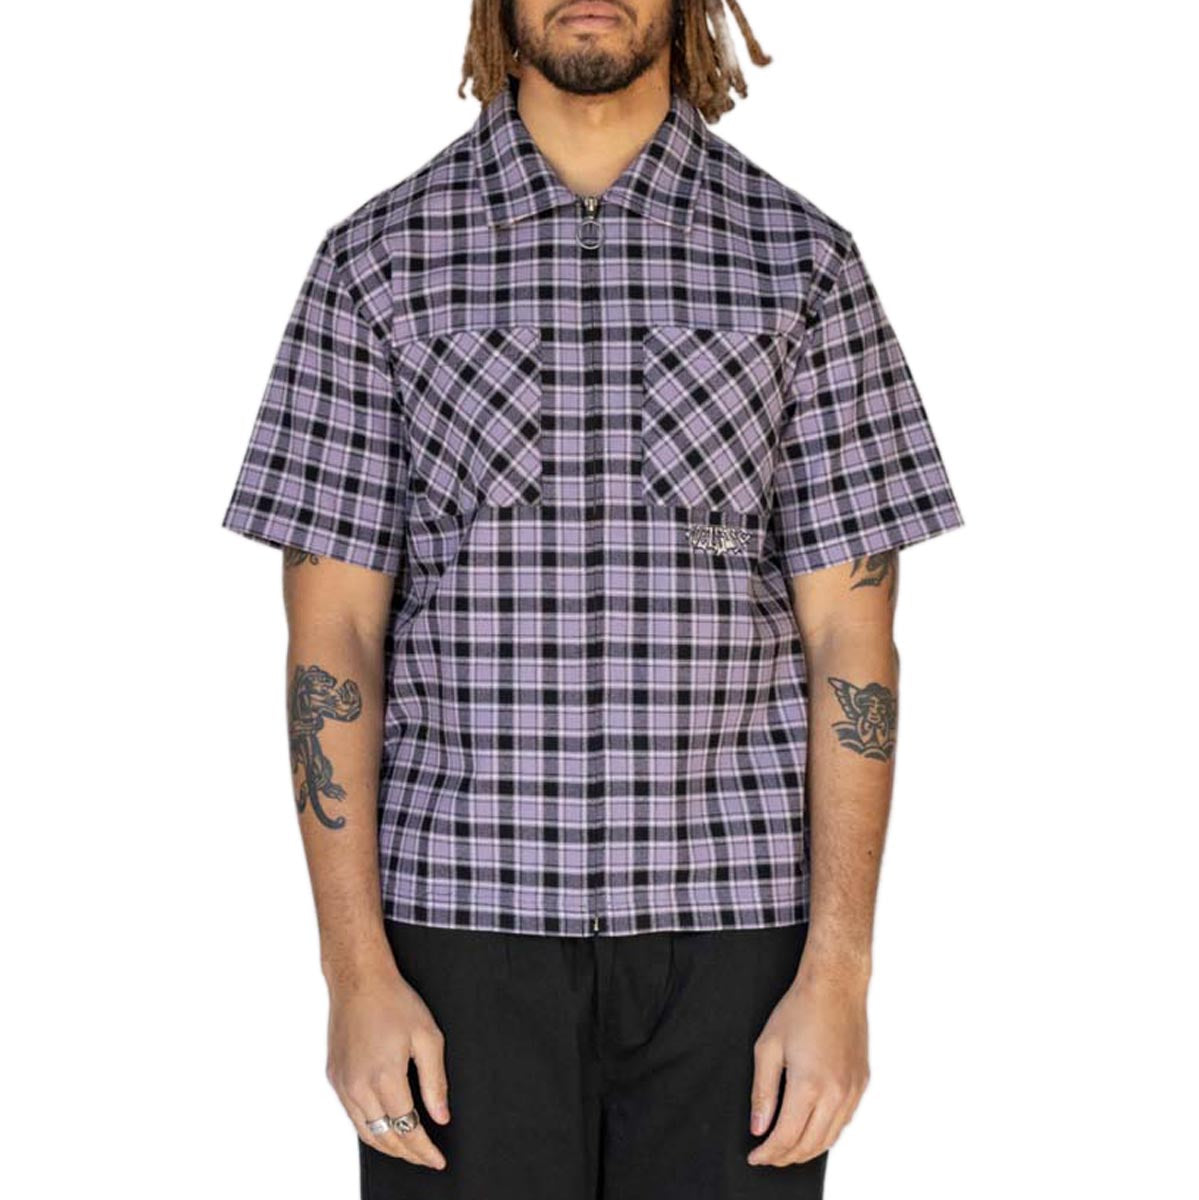 Welcome Cell Woven Plaid Zip Shirt - Lavender Grey image 1